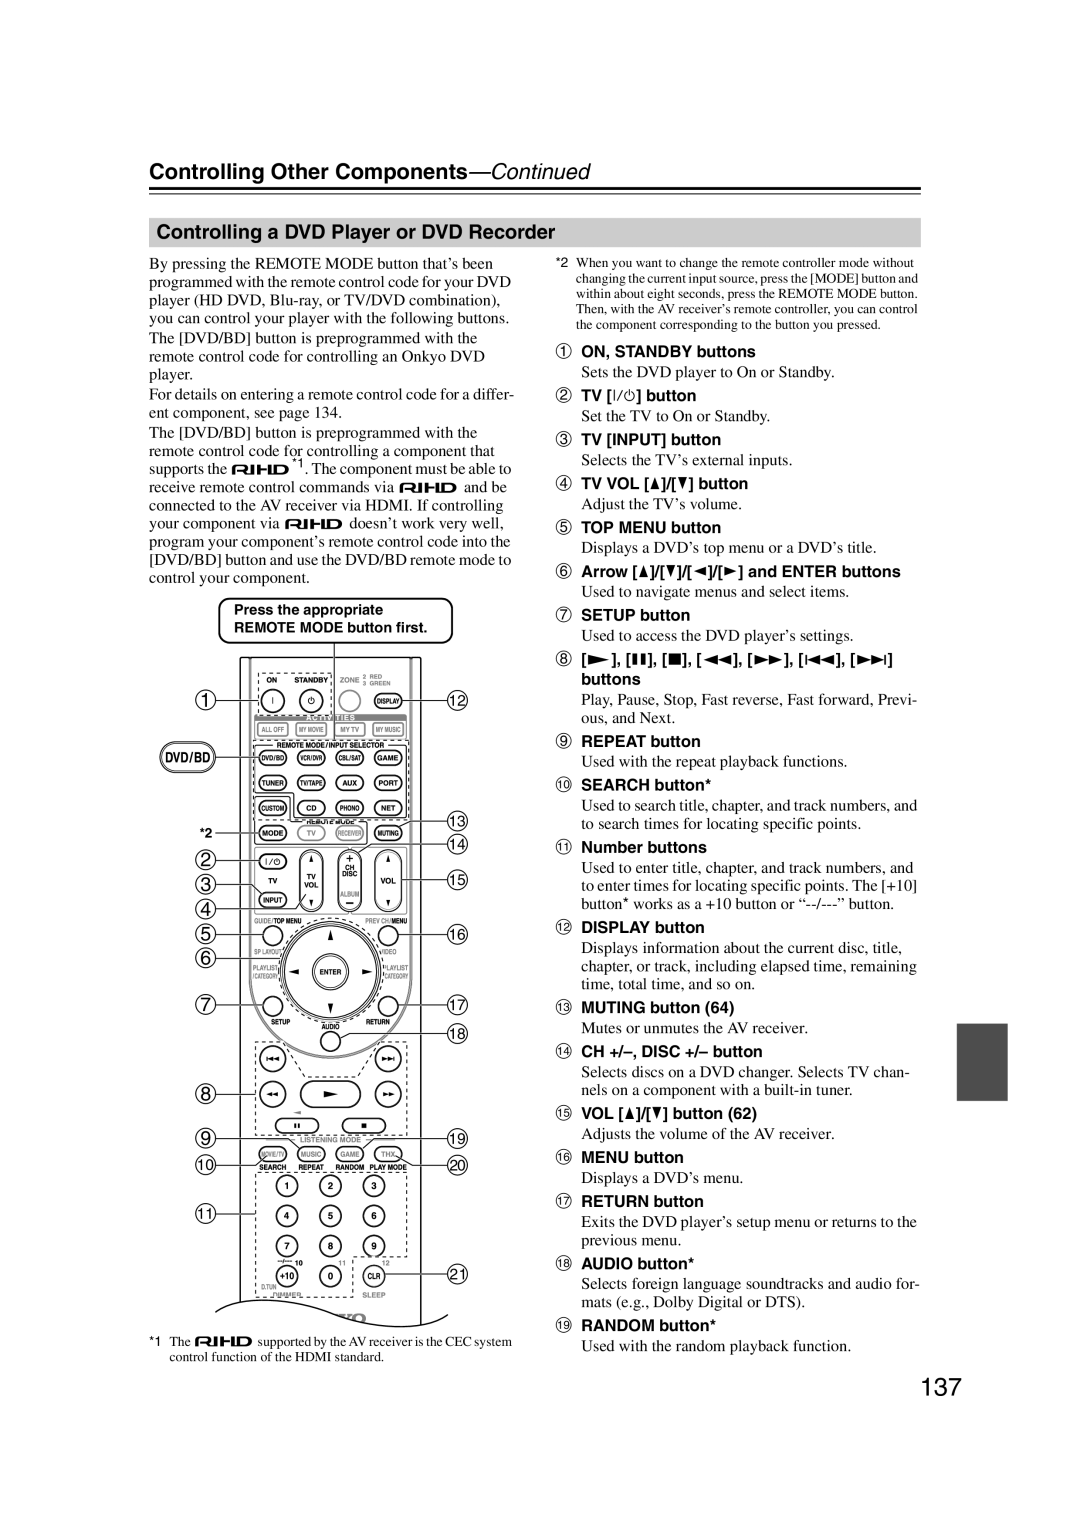 Onkyo TX-NR1007 instruction manual Controlling Other Components—Continued, bcdef 